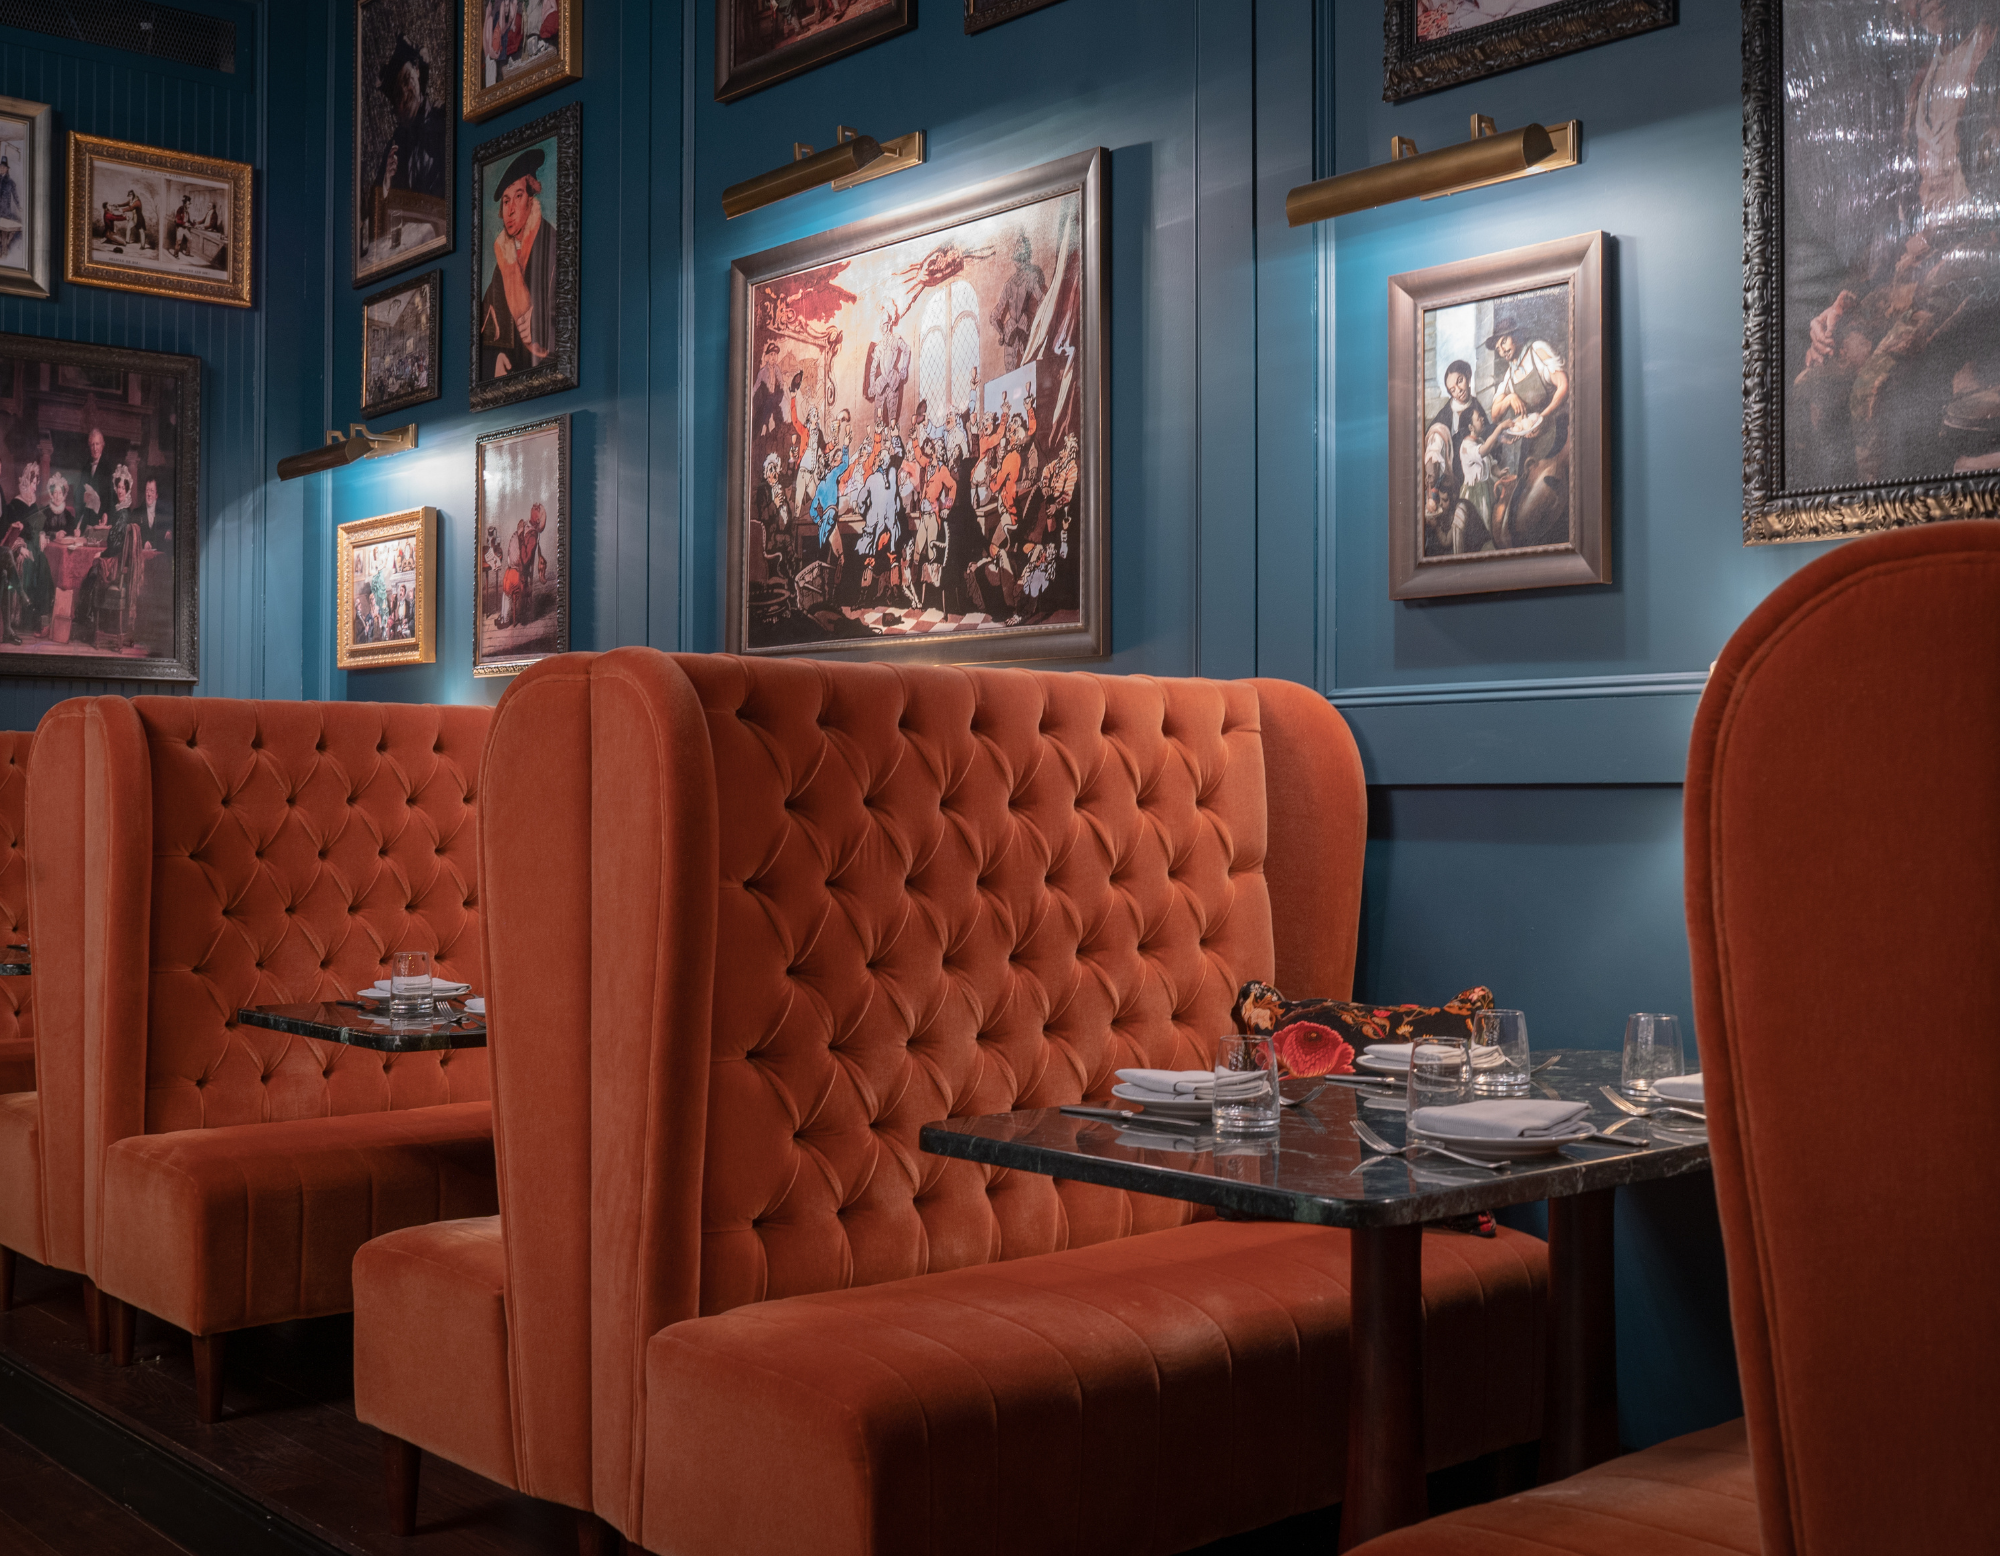 Bespoke - The Parlour Room